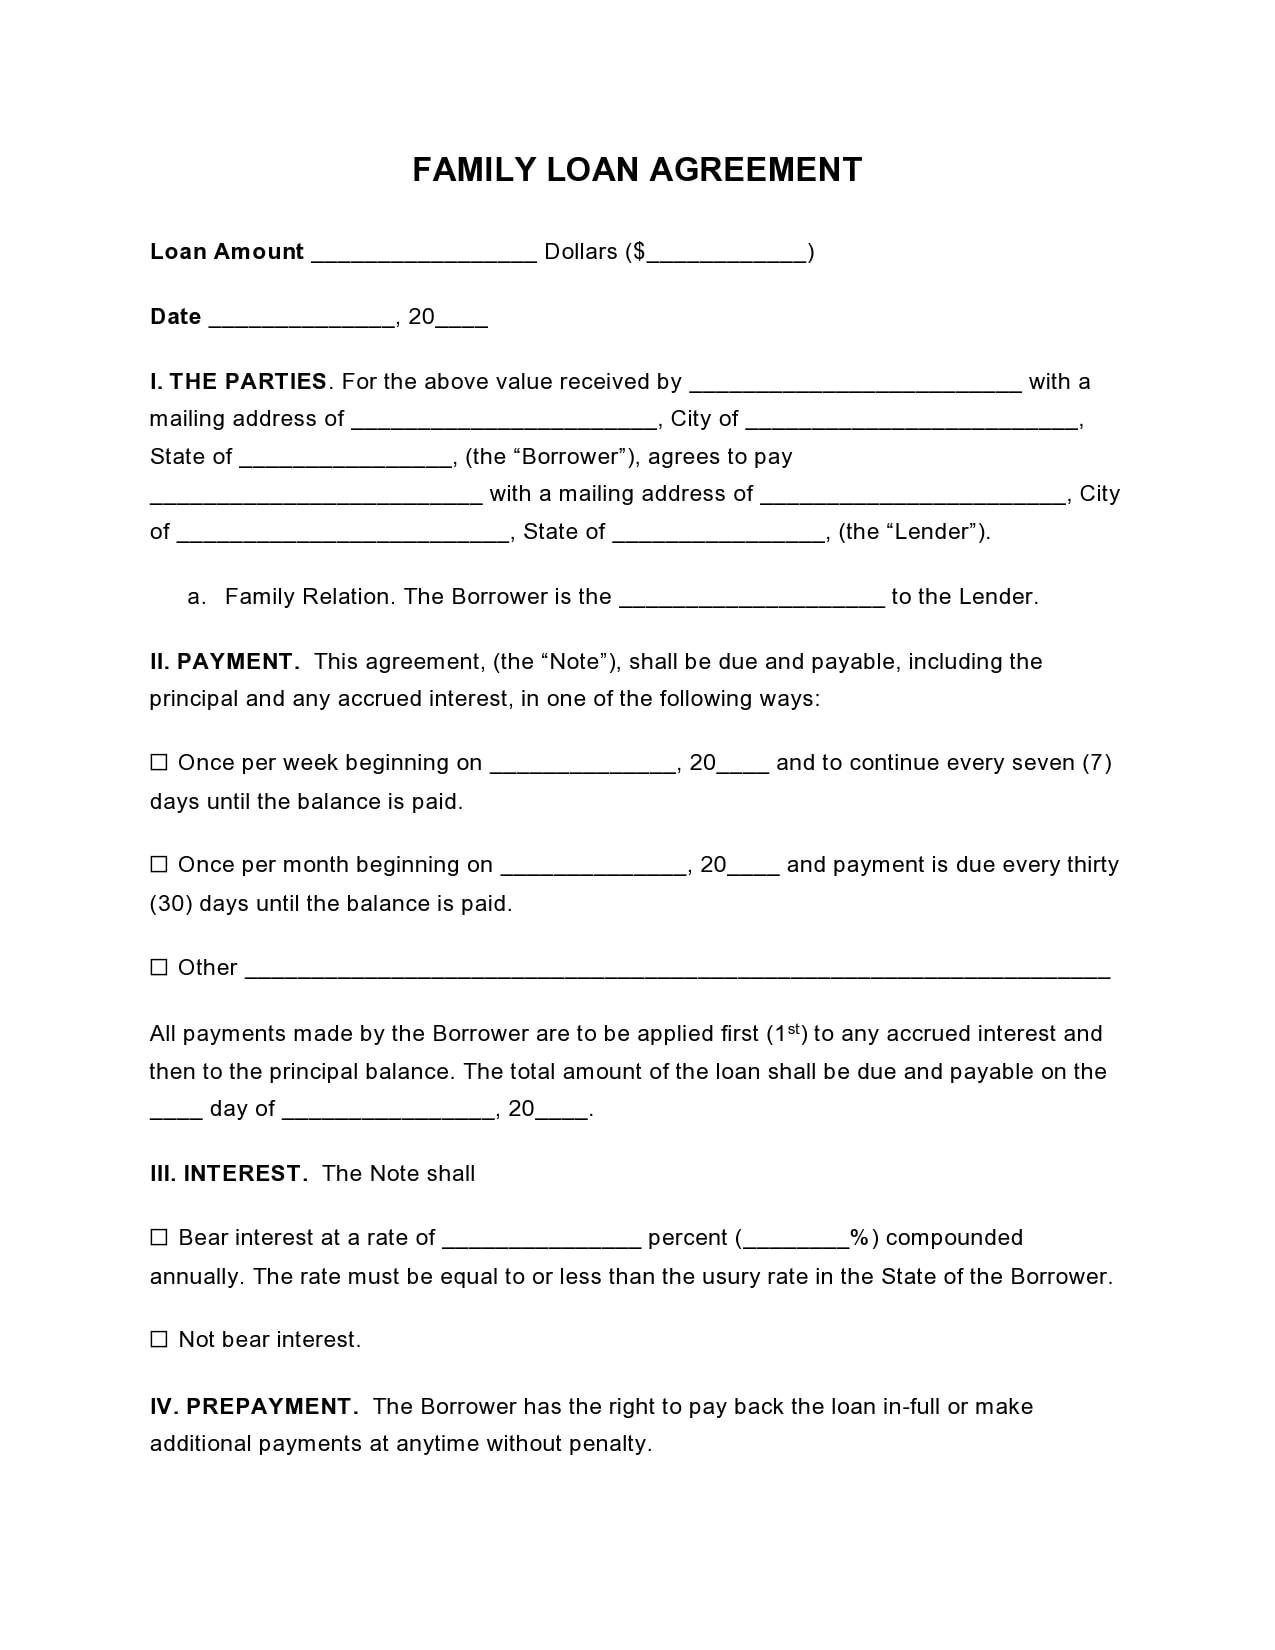 21 Simple Family Loan Agreement Templates (21% Free) Pertaining To cash loan agreement template free